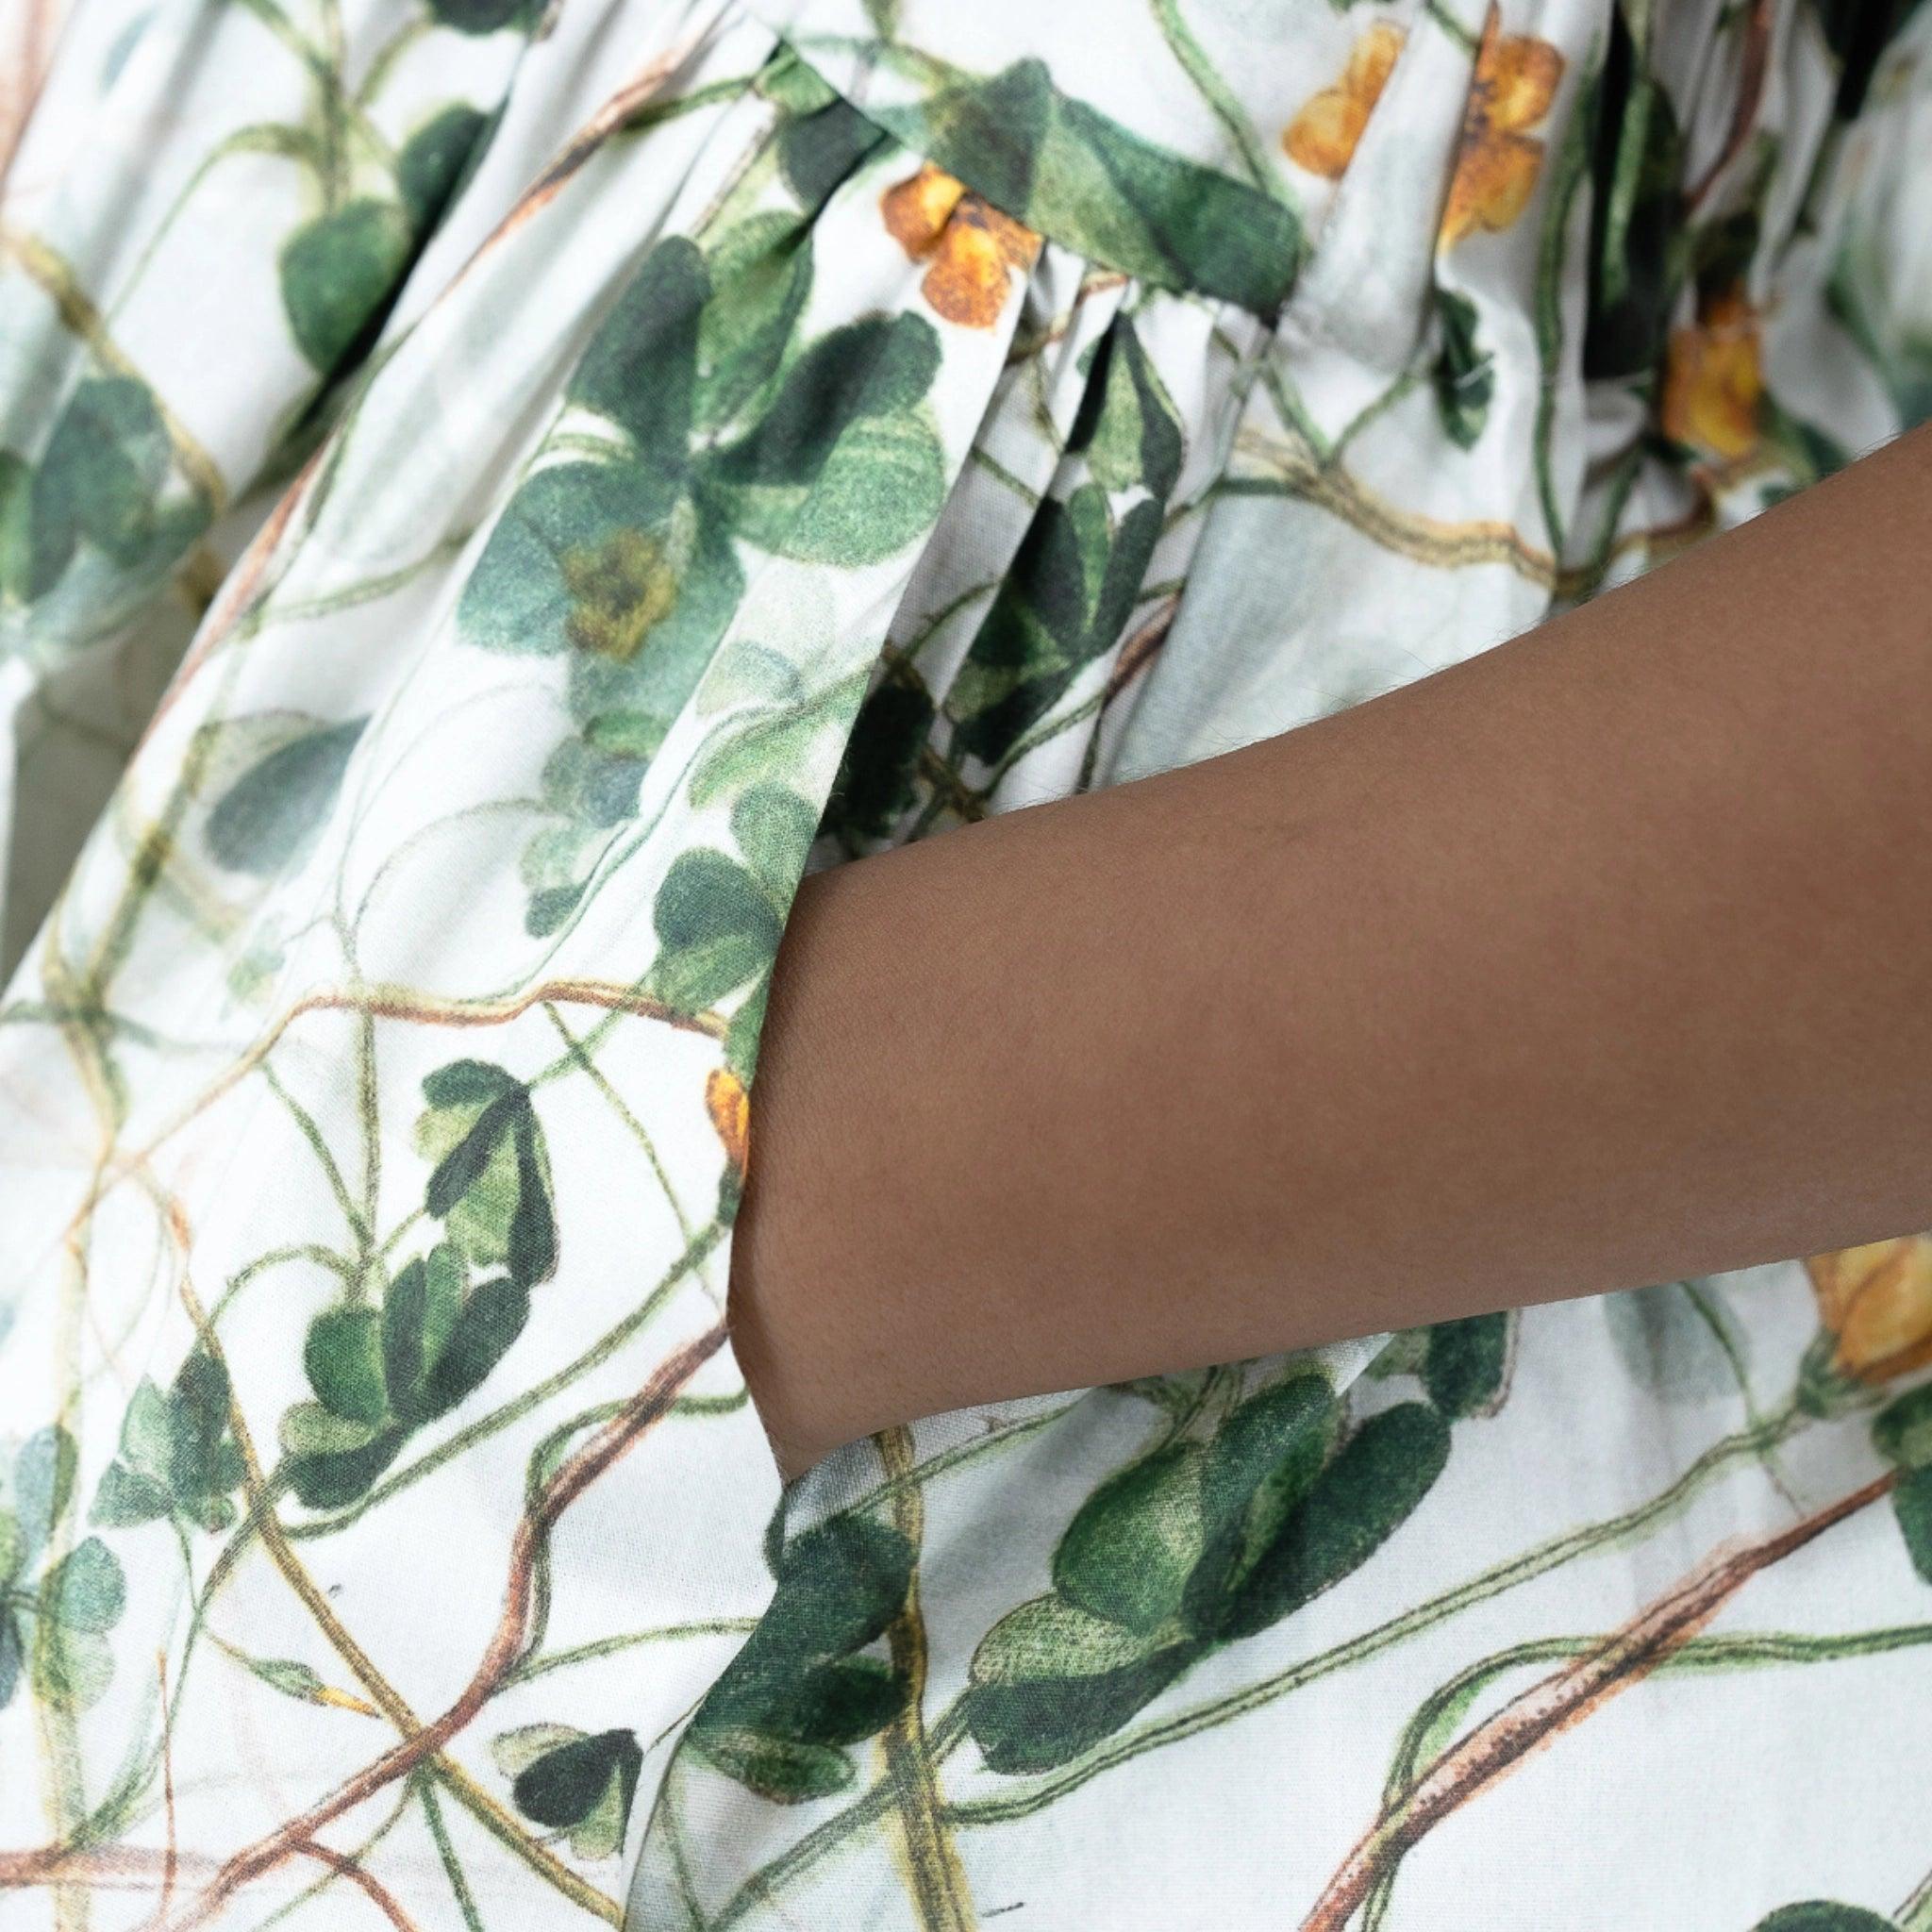 Close-up of a person's arm against a Karee green floral cotton dress for girls, focusing on the texture and colors of the material and skin.